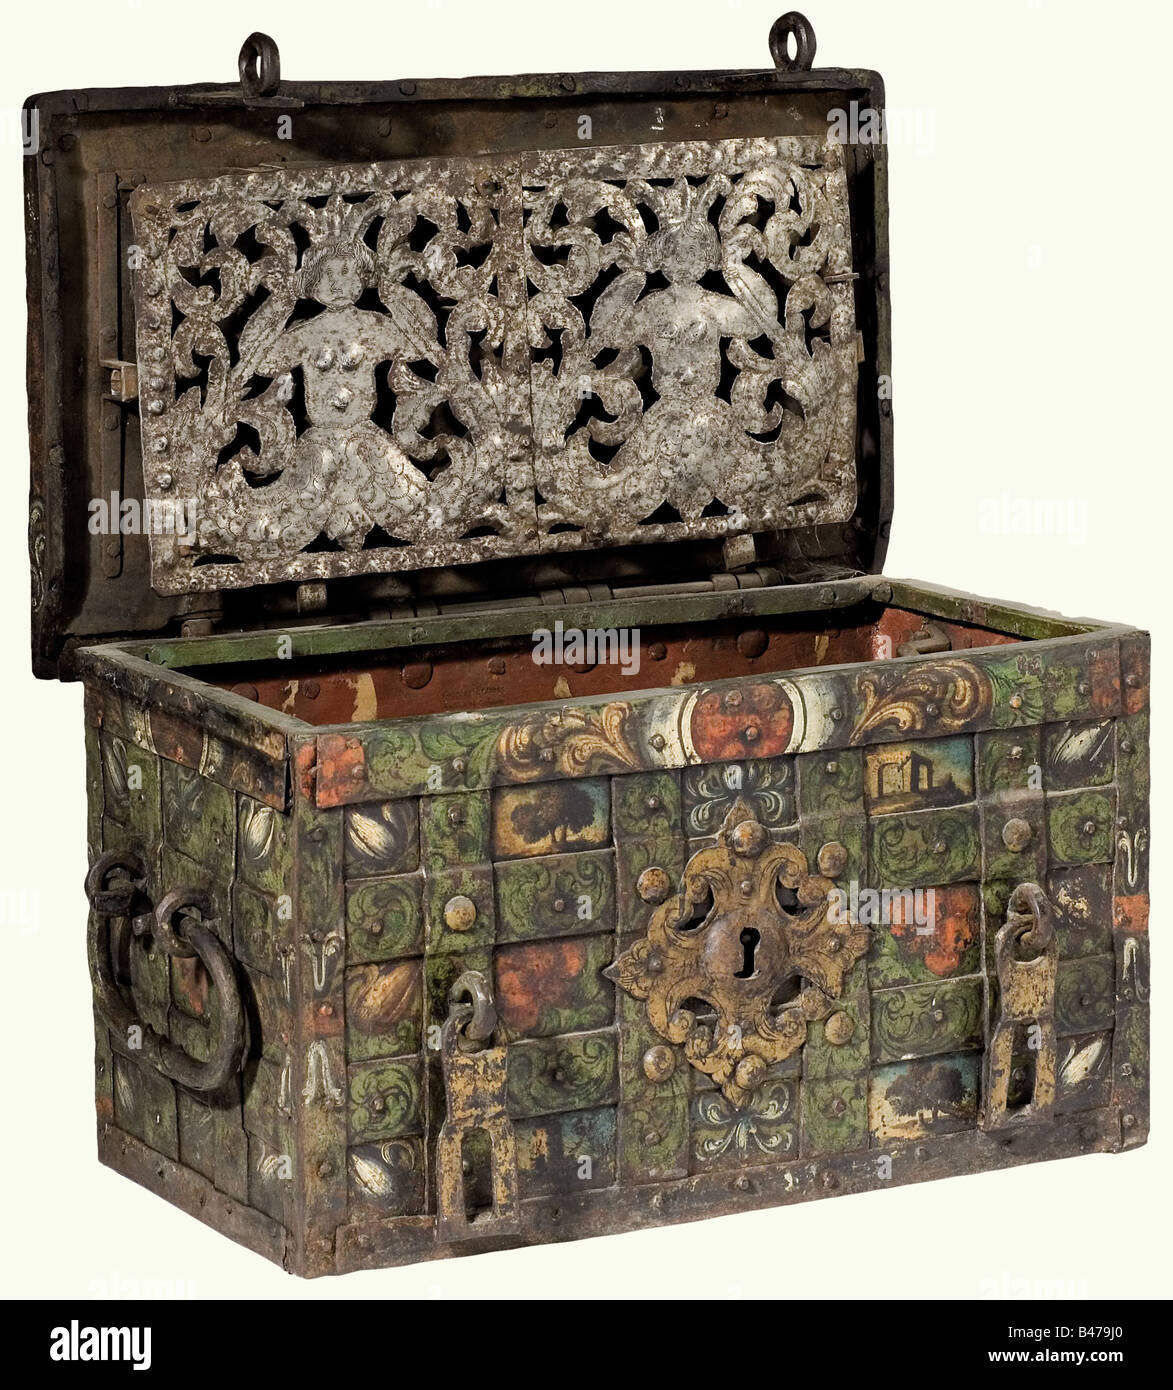 A strongbox painted in colour, German, 2nd half of the 17th century. Rectangular trunk with crossed and riveted strap reinforcements. Lid with central keyhole, movable cover. False lock on the front with openwork and embossed escutcheon, two hasps. Two movable carrying handles on the sides. Original colour painting on front and sides with small landscape vistas amid vines and scrollwork. There is a lock mechanism with six tumblers in the lid, lock cover with rich openwork and engraved decoration showing two Nereids. Iron key with hollow shank. Dimensions 37 x 7, Stock Photo